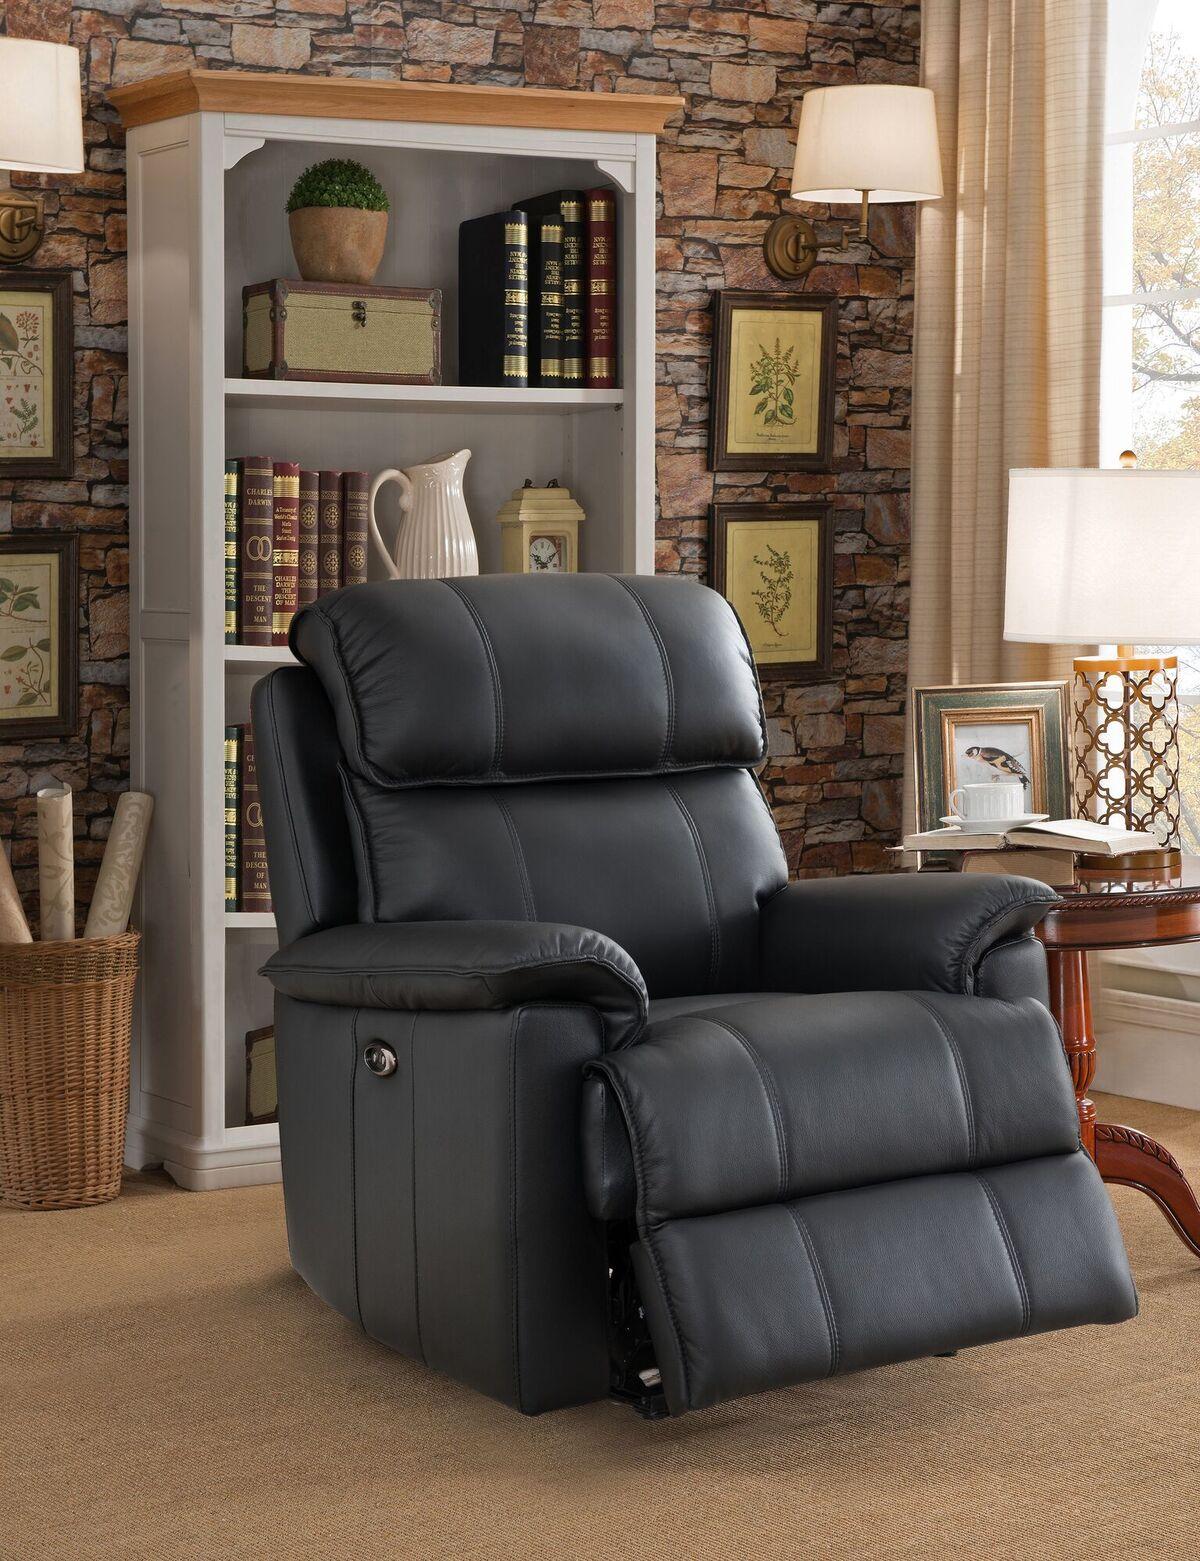 Contemporary, Modern Recliner Chair Hydeline Harwood Harwood-P-BLK in Black Top grain leather